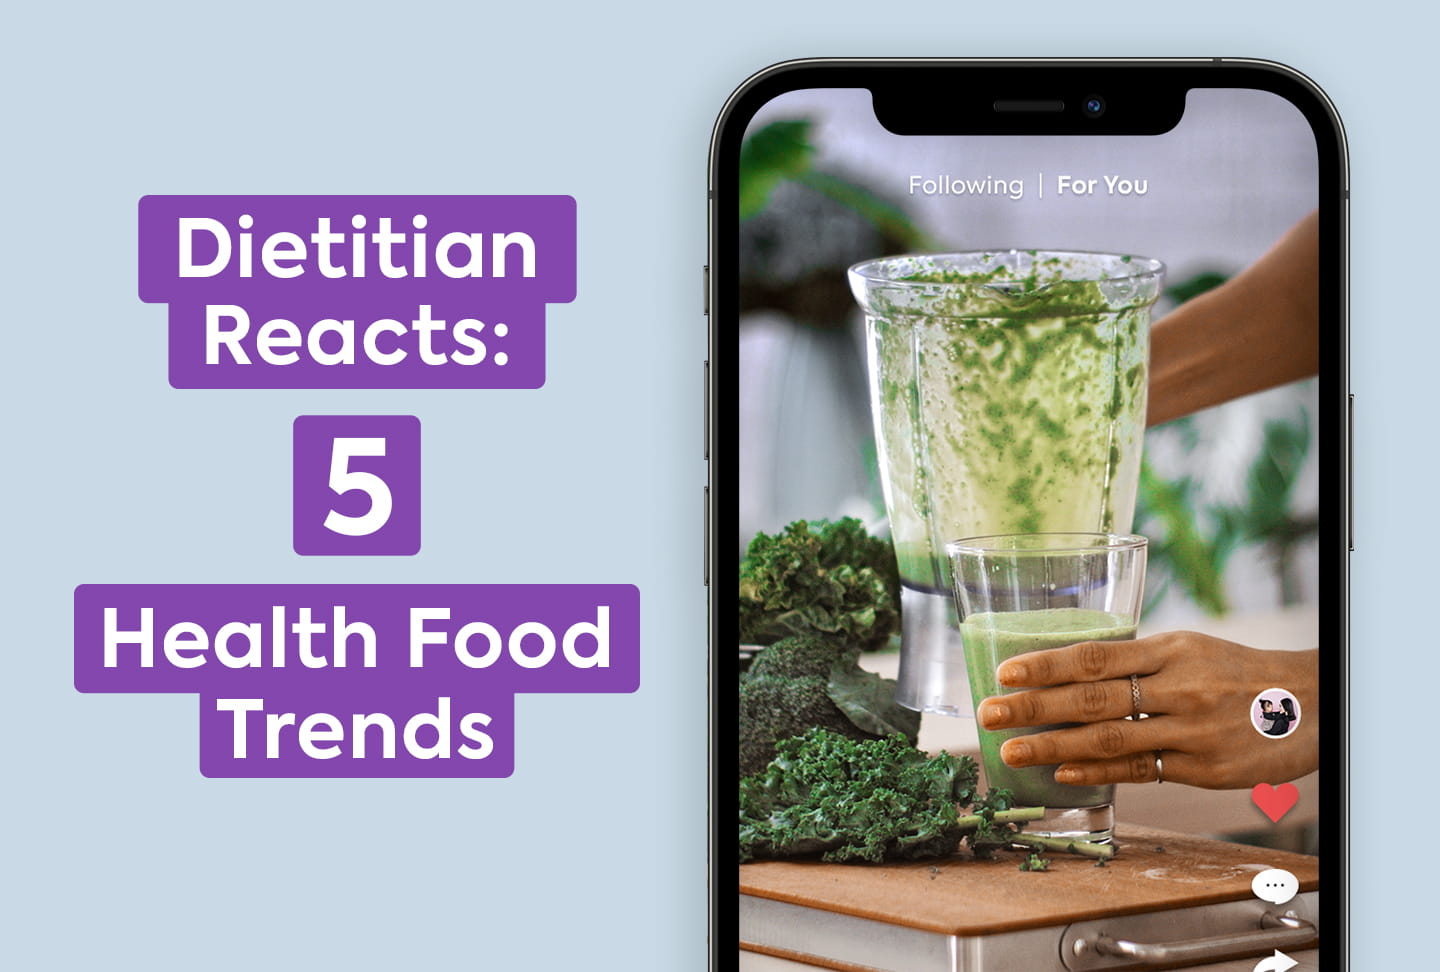 Photo on phone of someone juicing vegetables. Text reads "Dietitian Reacts: 5 Health Food Trends"